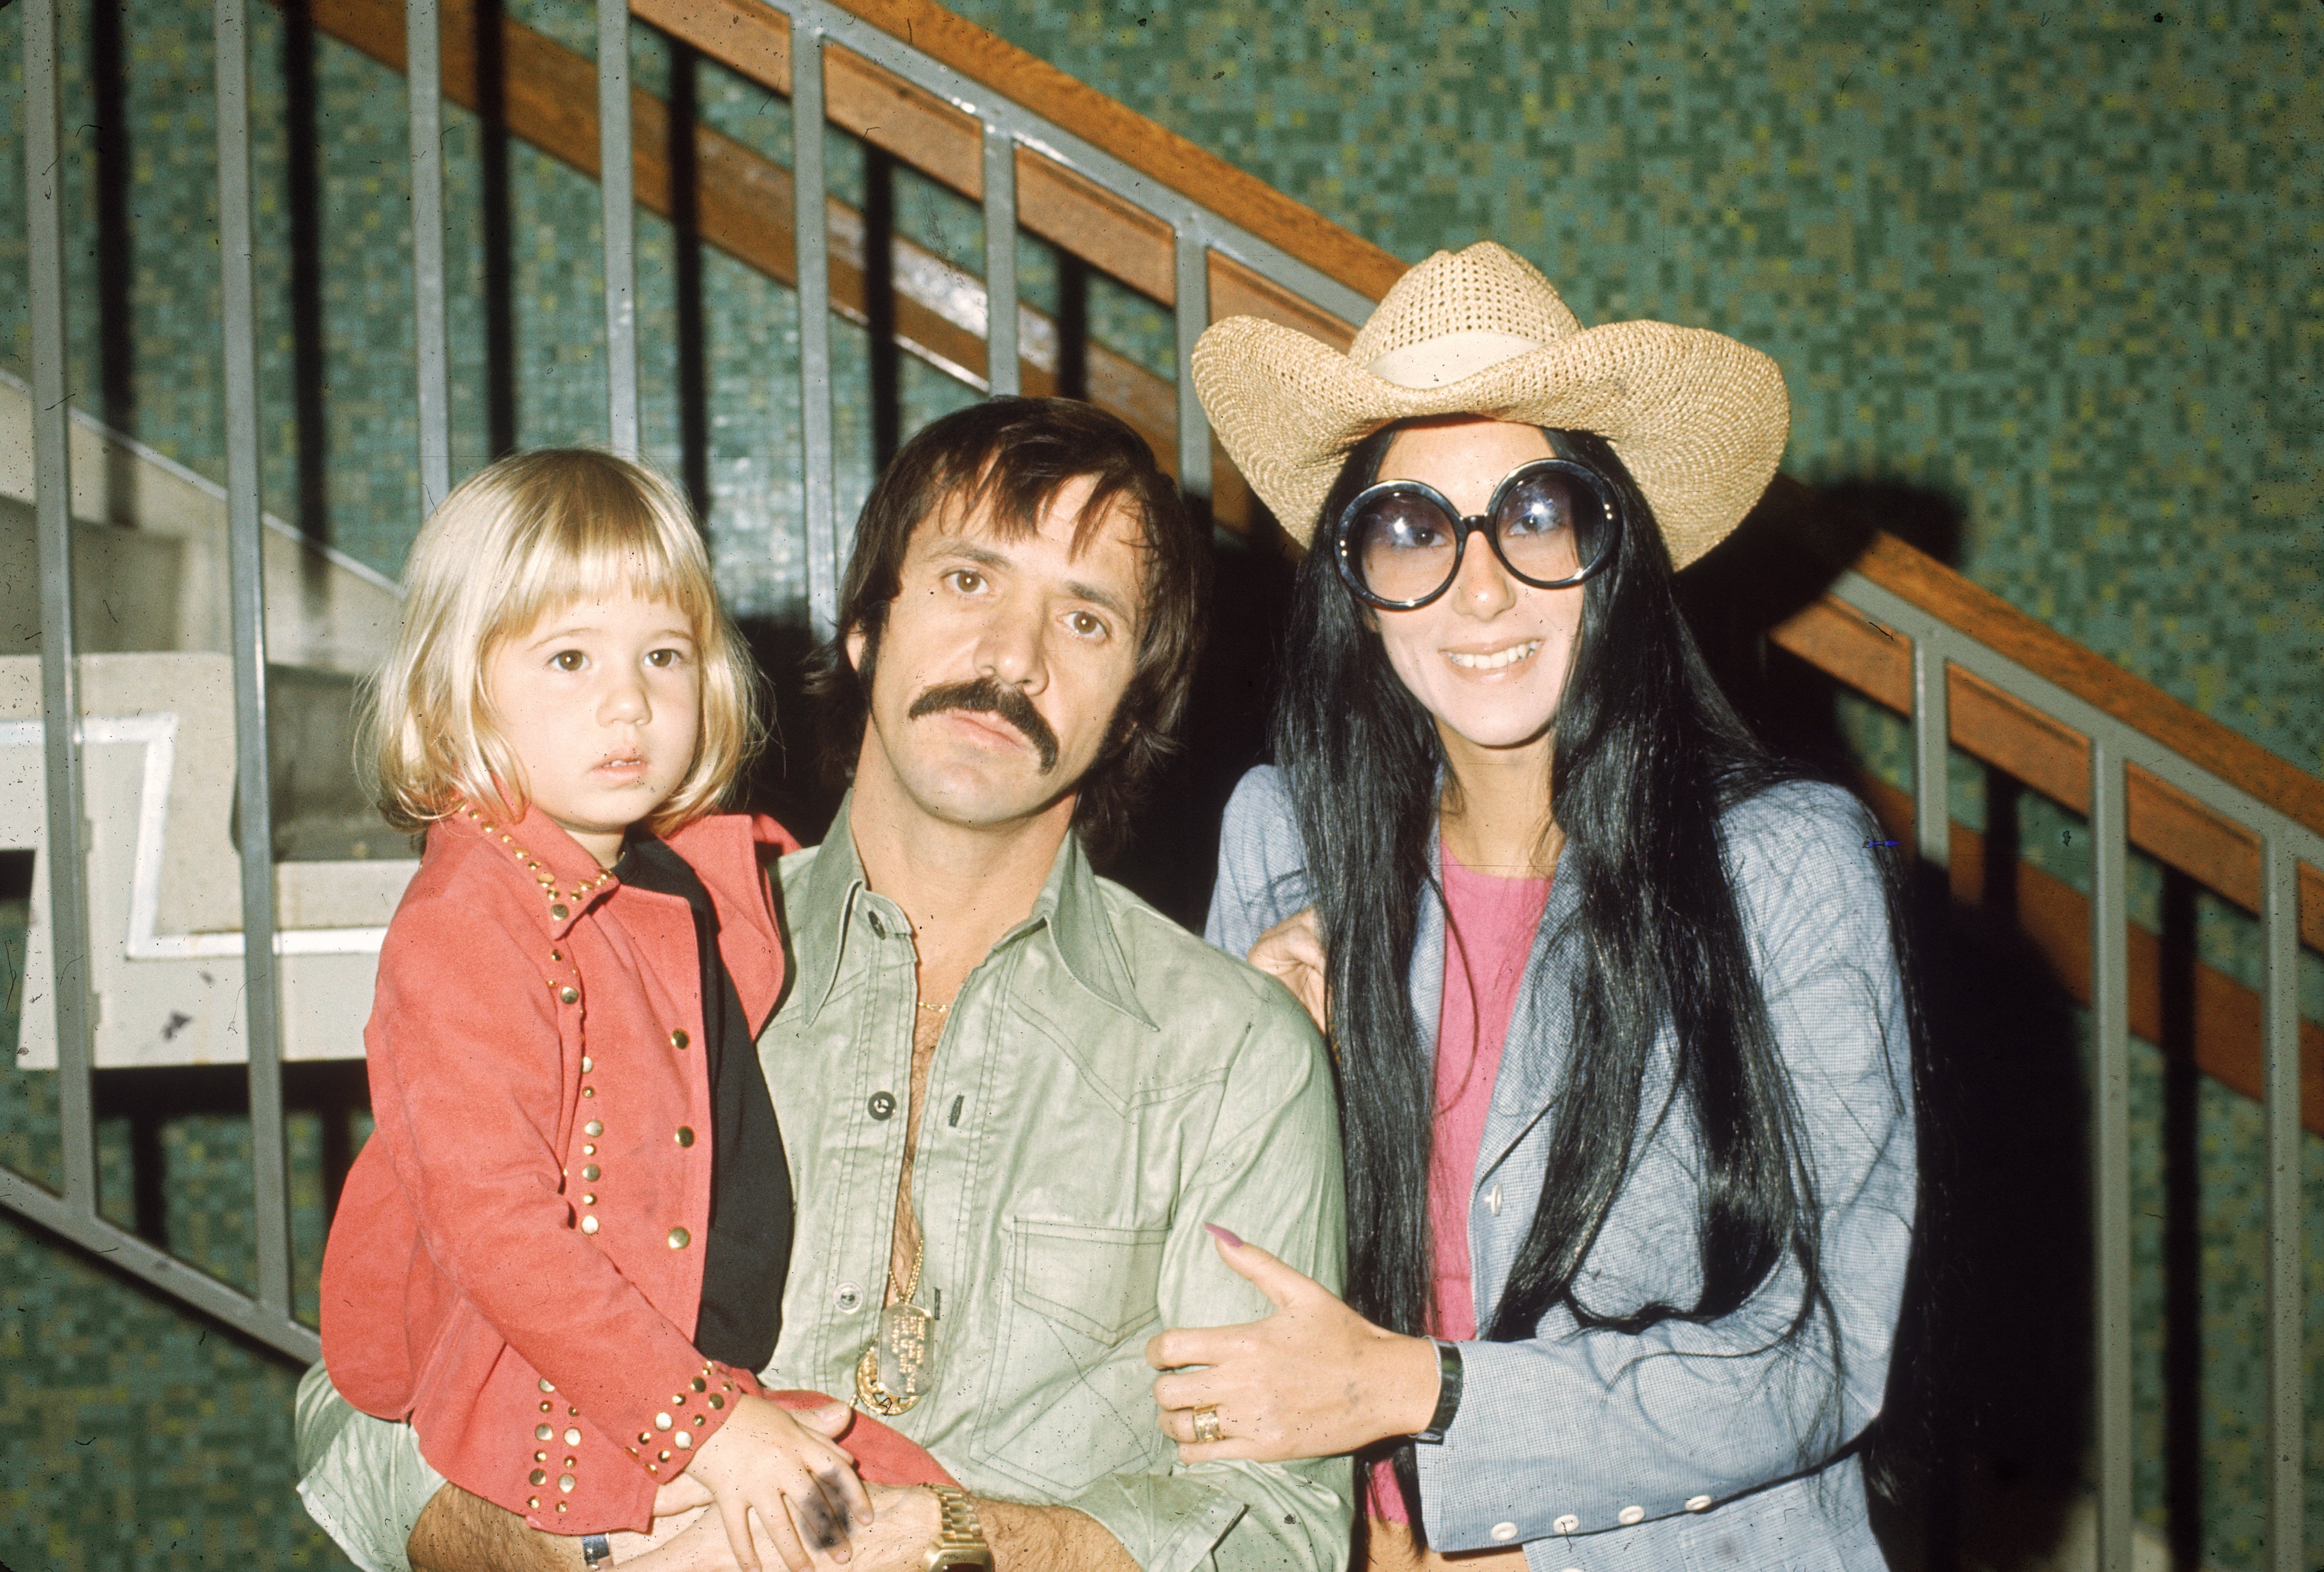 Actors Sonny and Cher Bono pose with their daughter Chastity in front of a staircase on March 1, 1973 | Photo: Getty Images